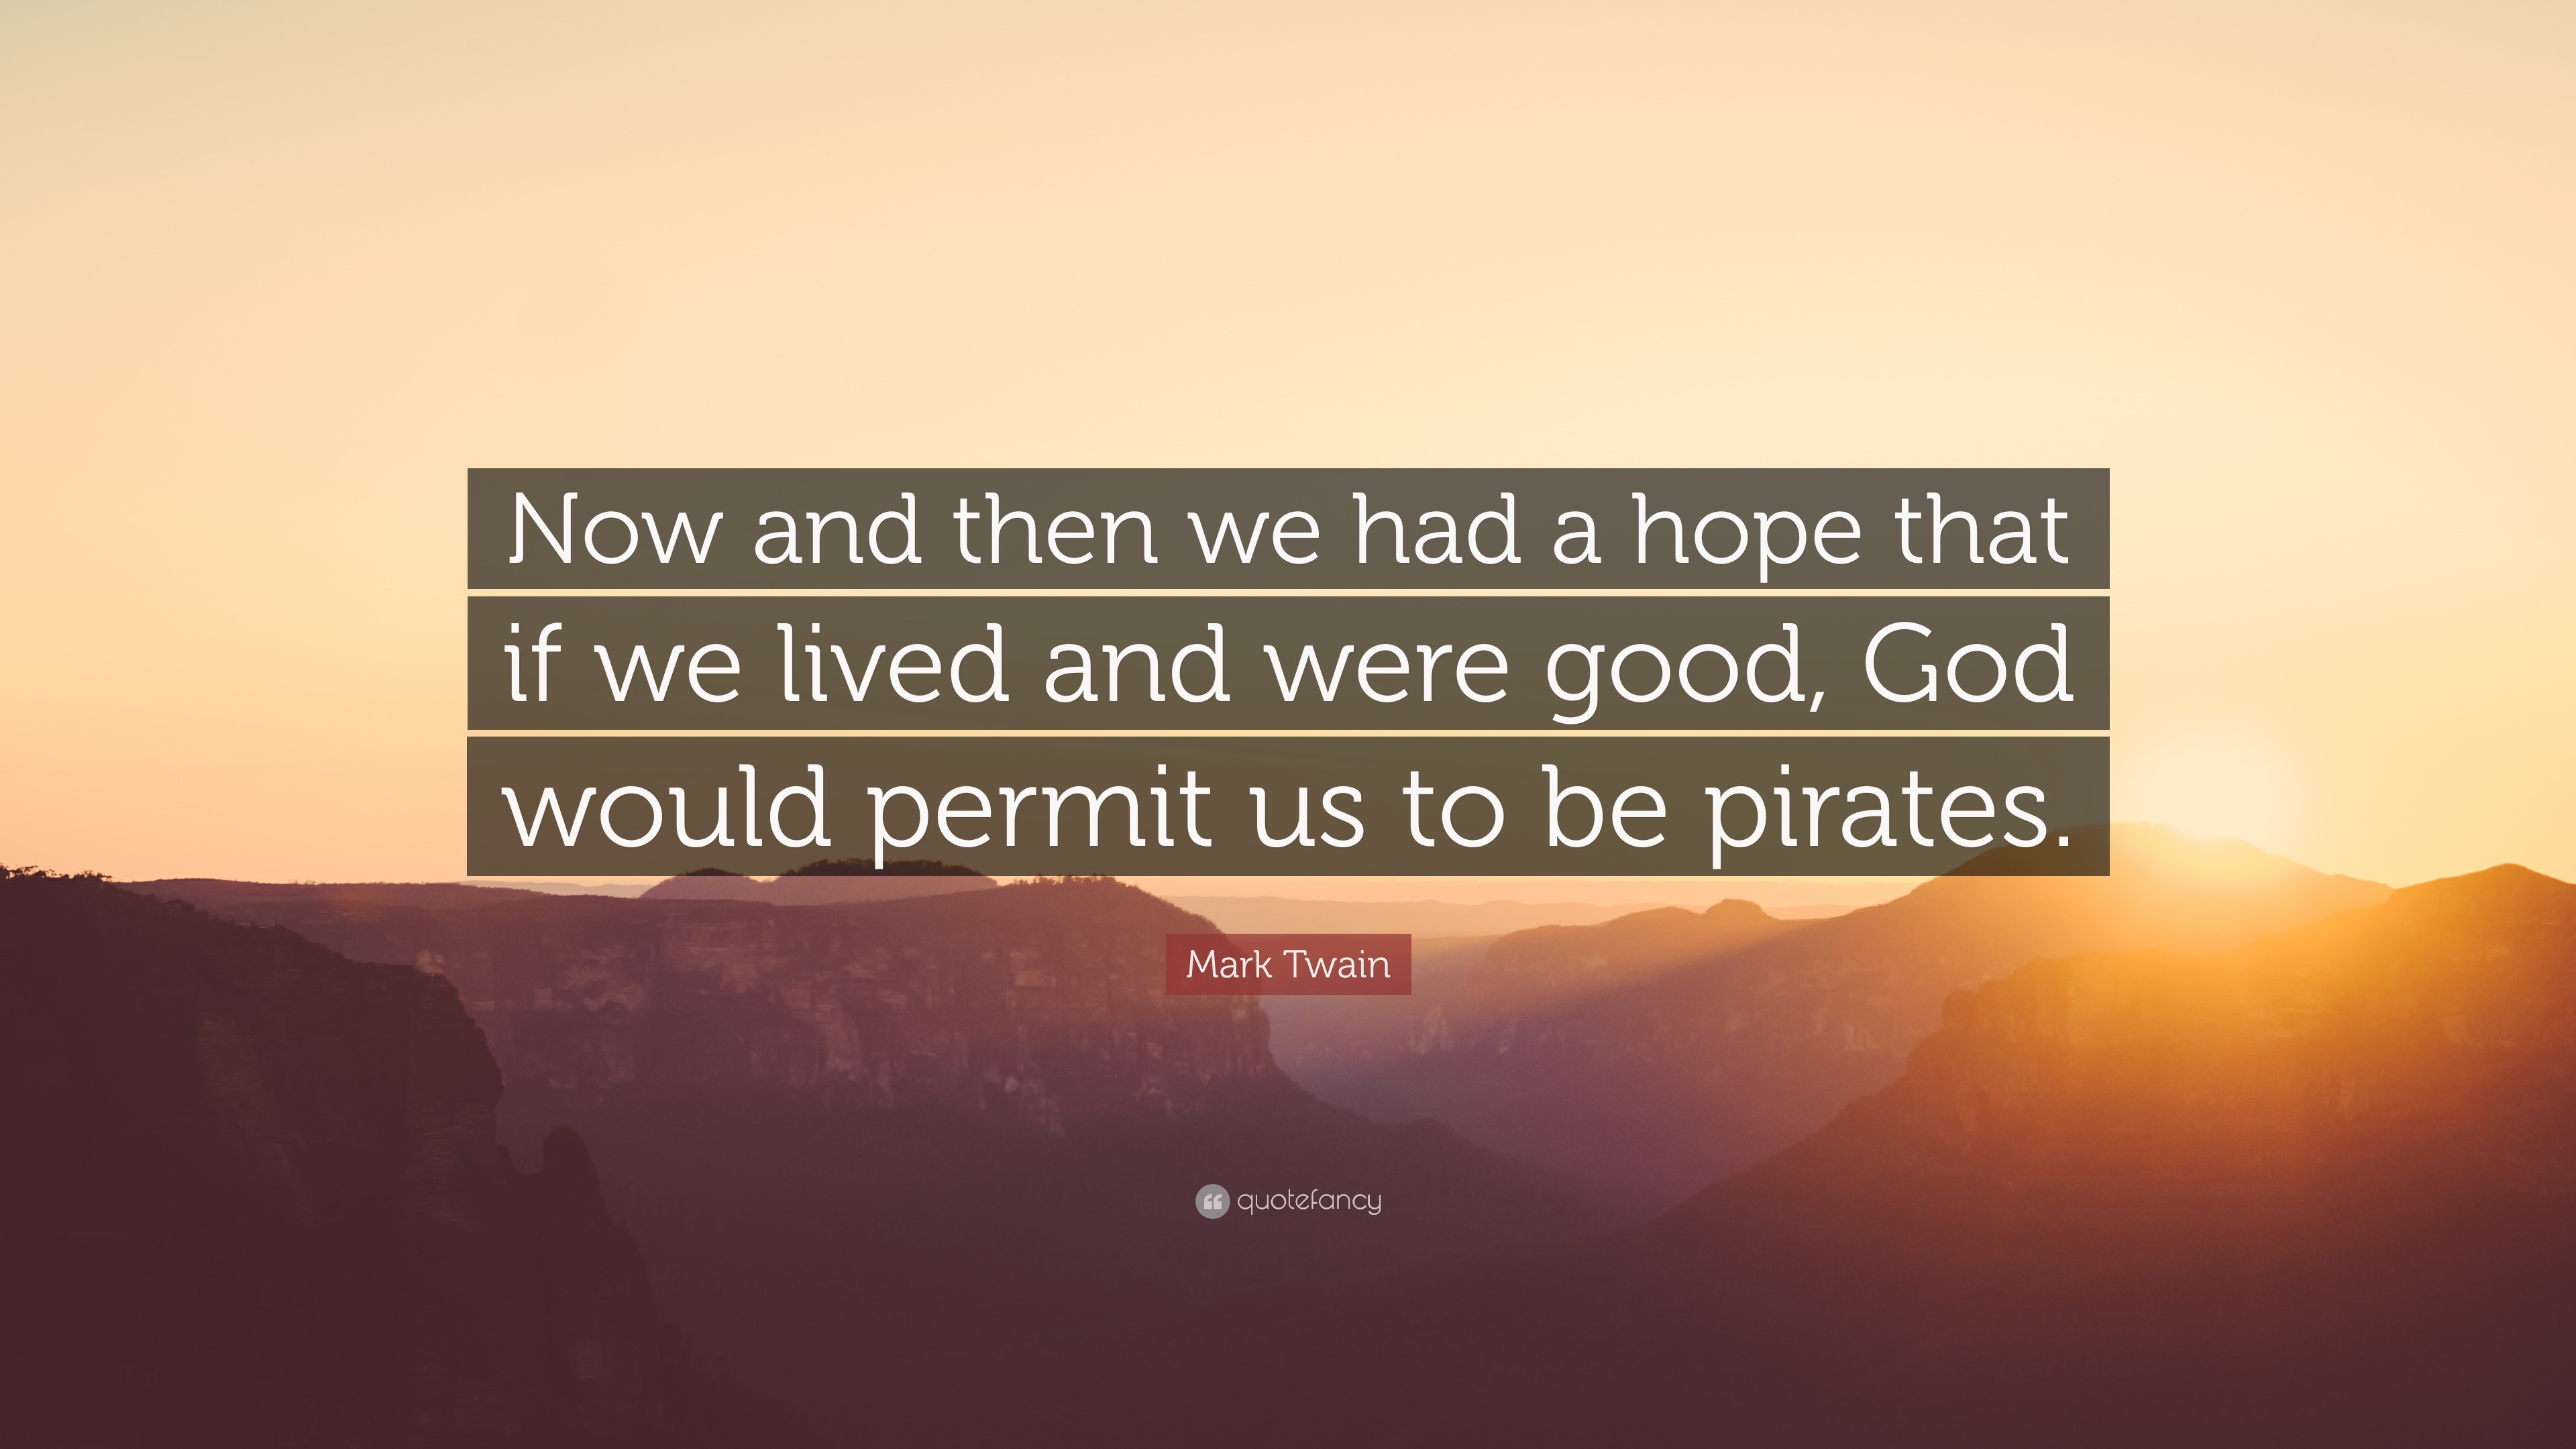 Mark Twain Quote: "Now and then we had a hope that if we lived and were good, God would permit ...